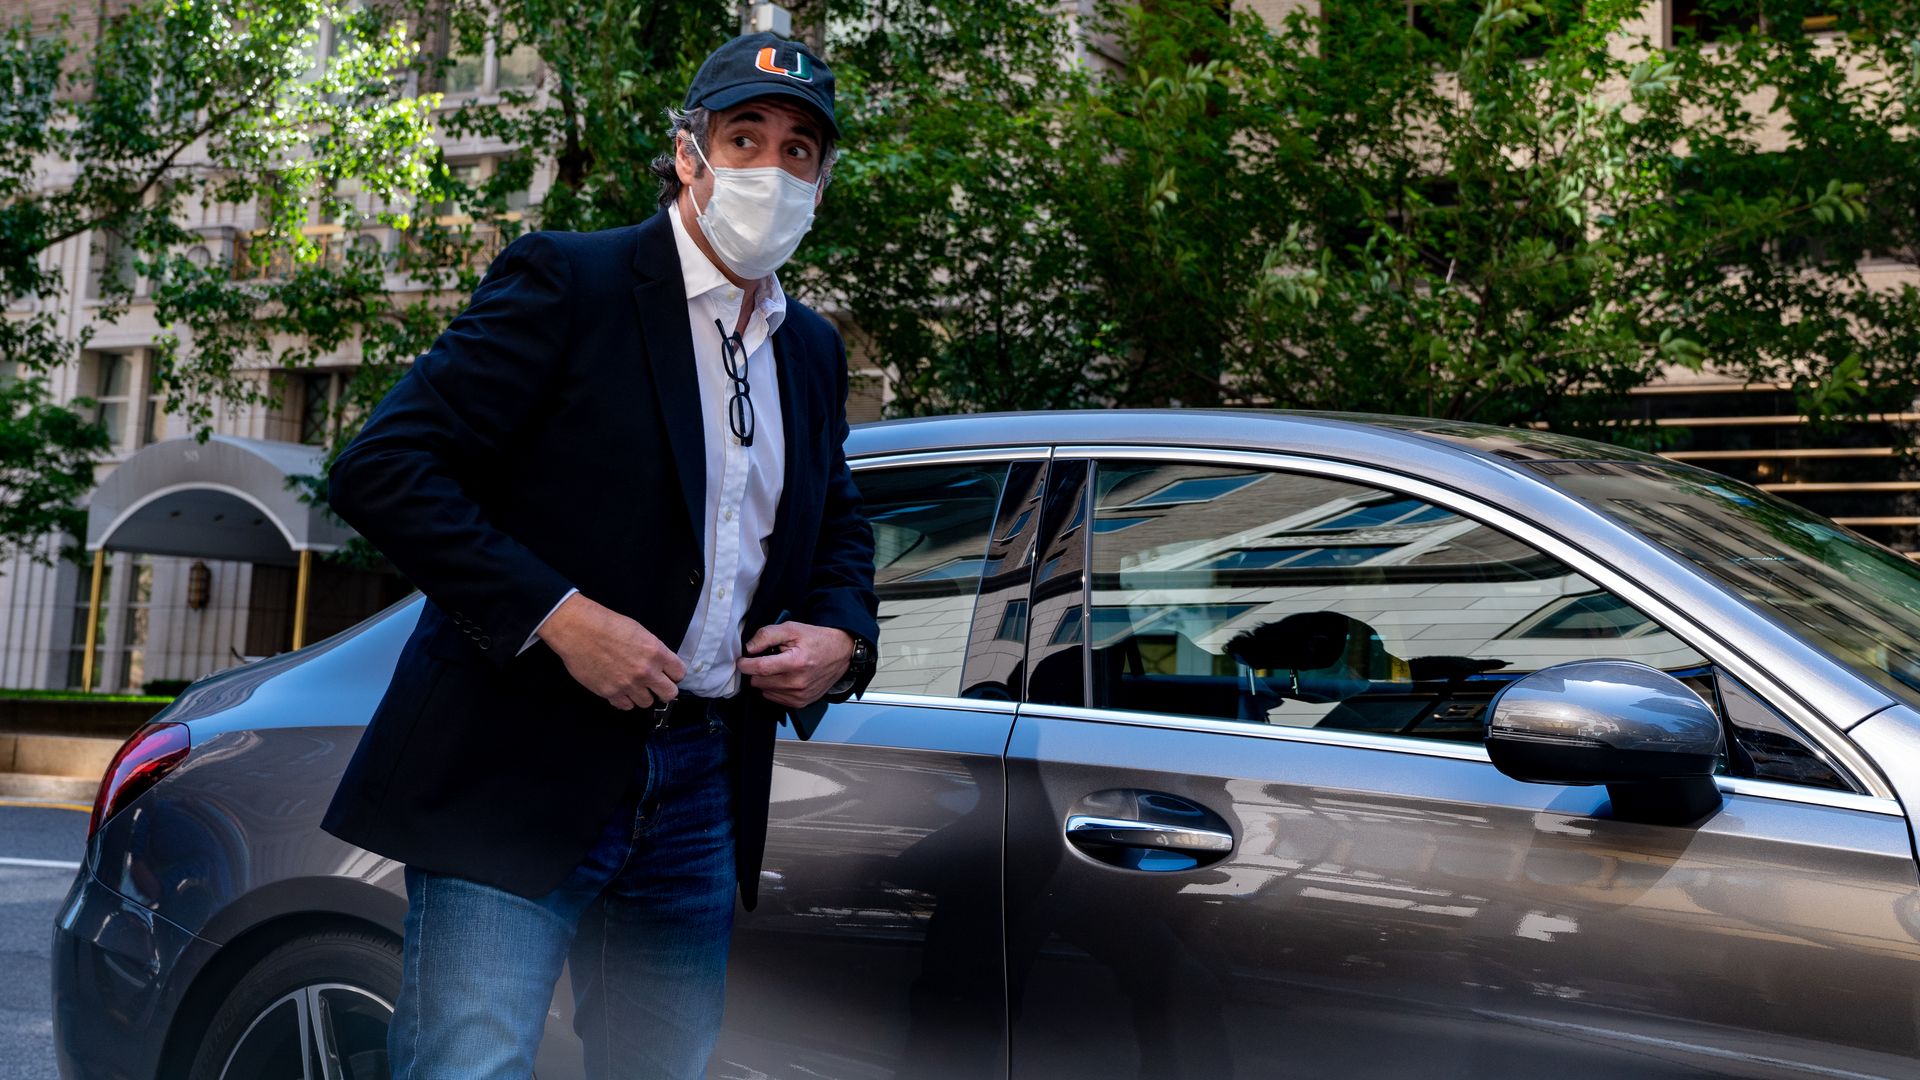 Michael Cohen stands wearing a mask outside of a car